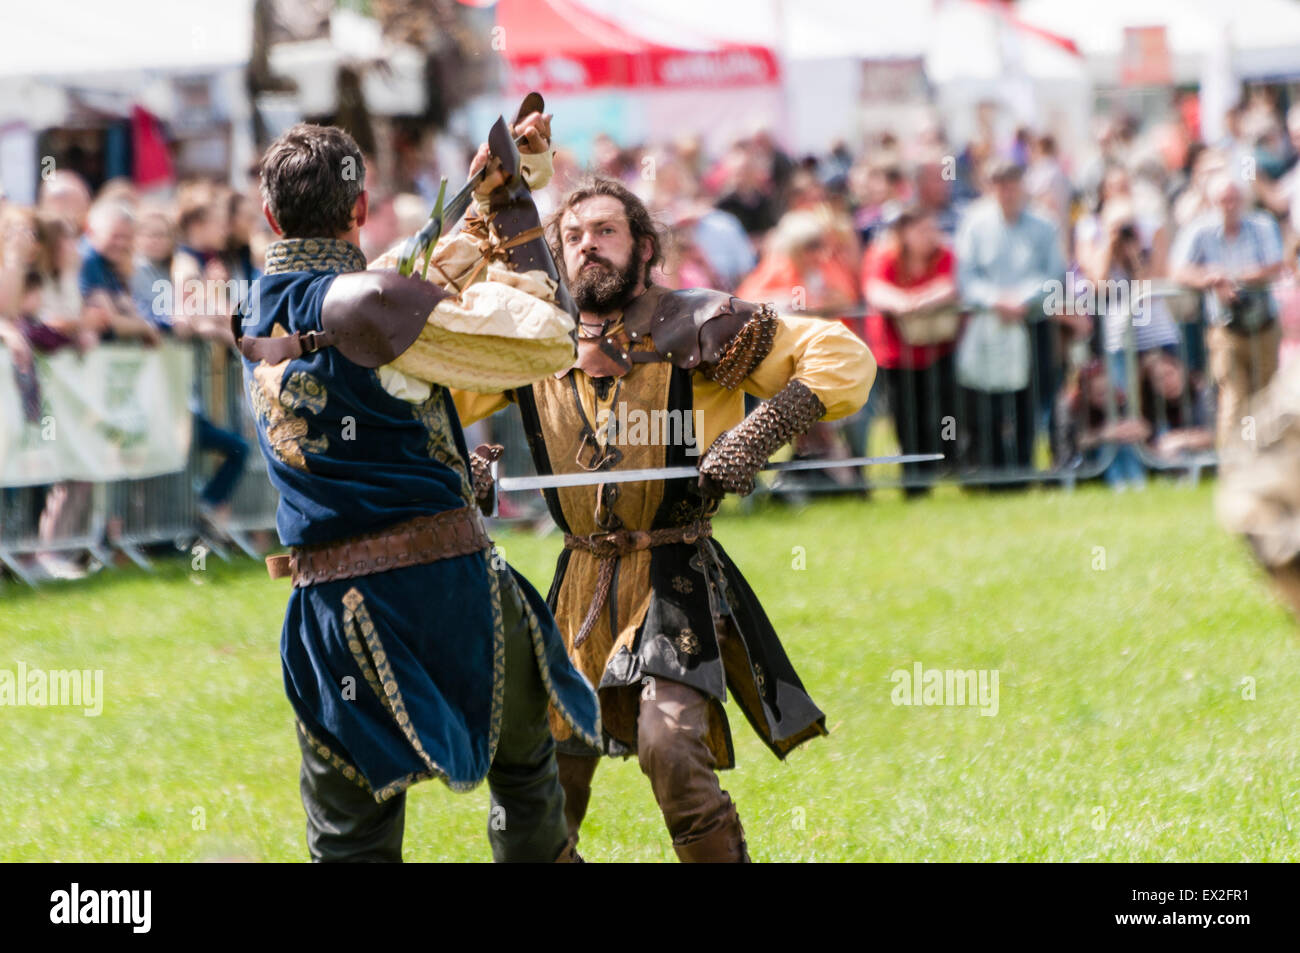 Men dressed as knights stage a battle for a crowd at an outdoor fair. Stock Photo